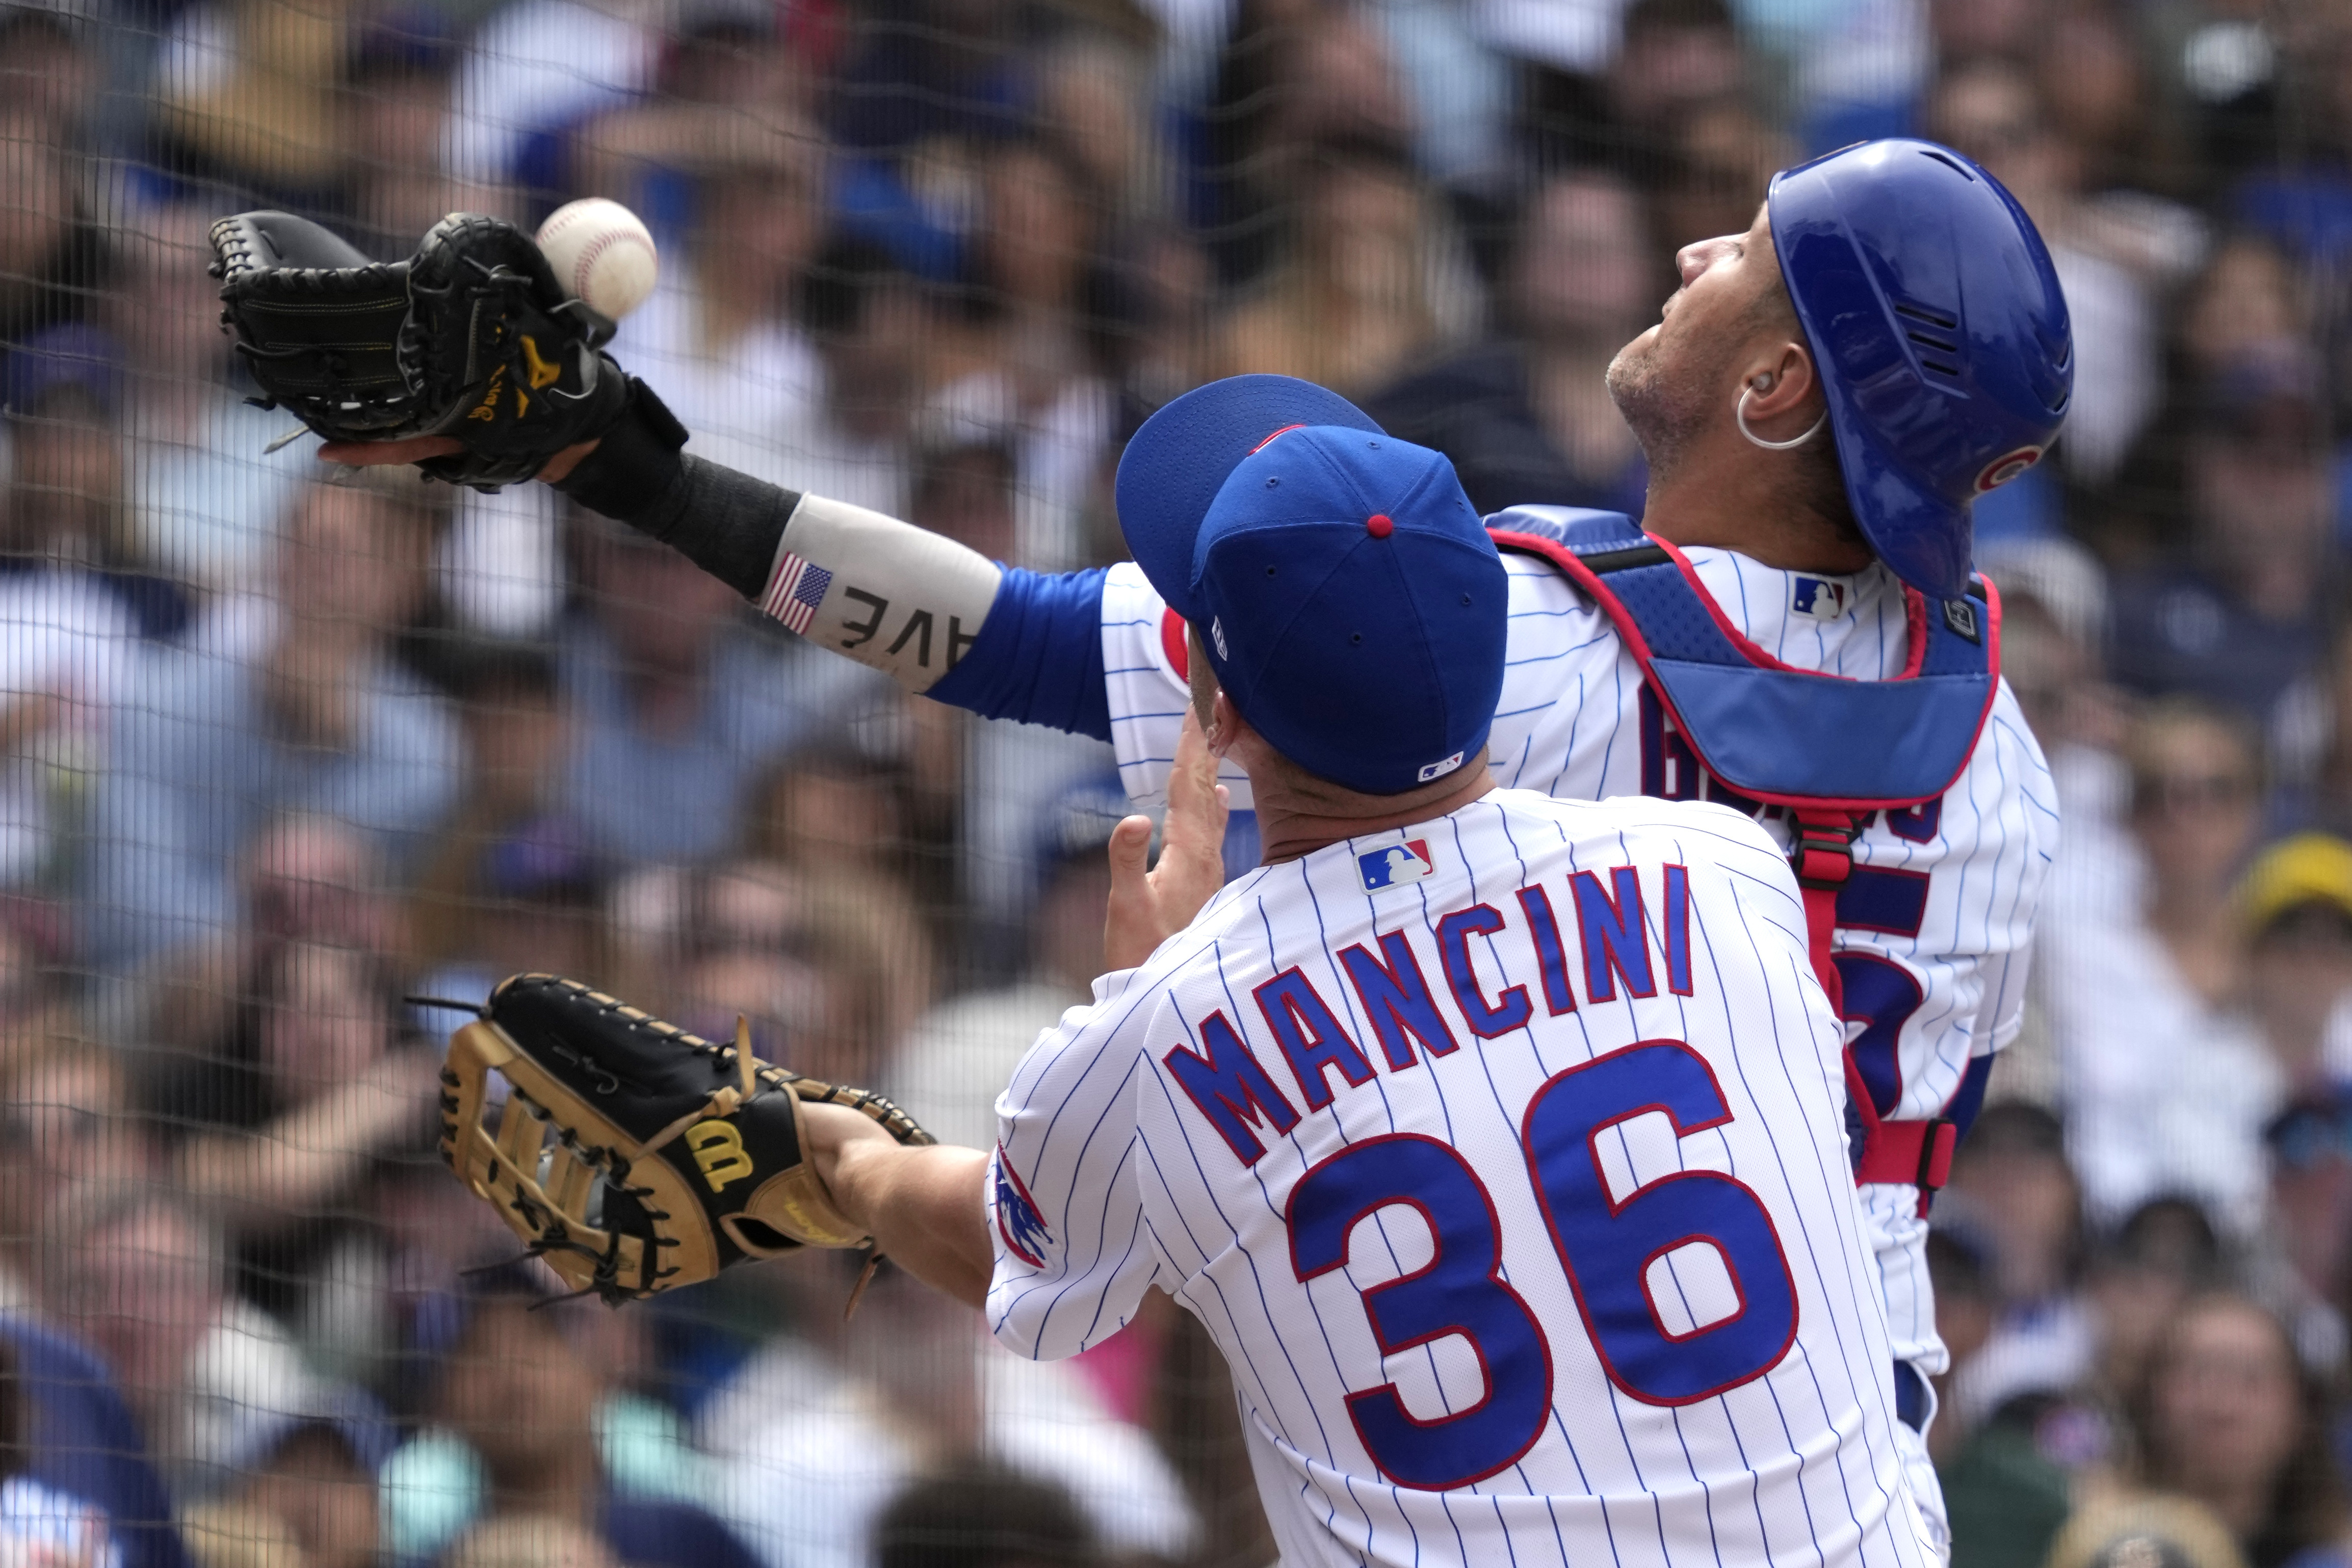 Cubs pull away, complete sweep of skidding White Sox